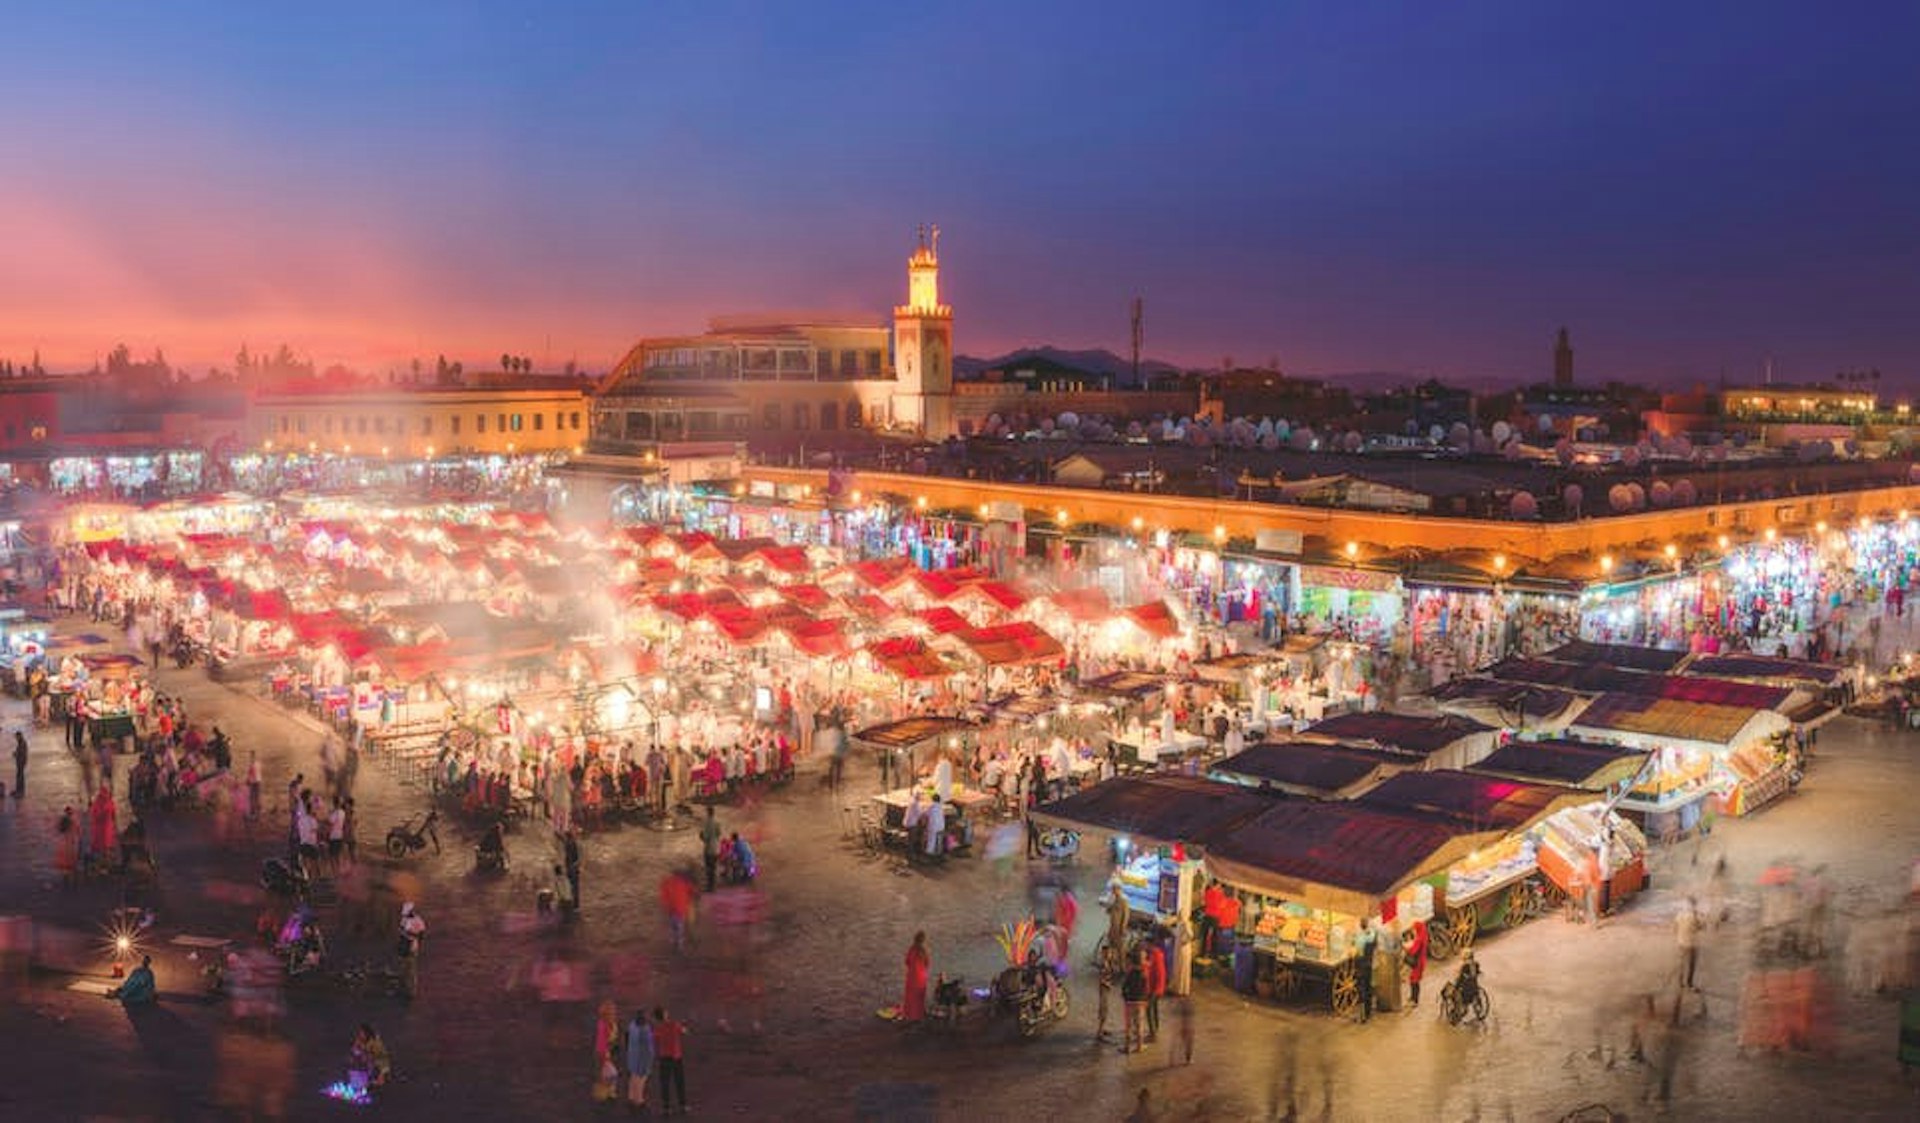 Morocco is full of drama – and nowhere more so than Marrakesh’s main square, Djemaa el-Fna © inigofotografia / Getty Images